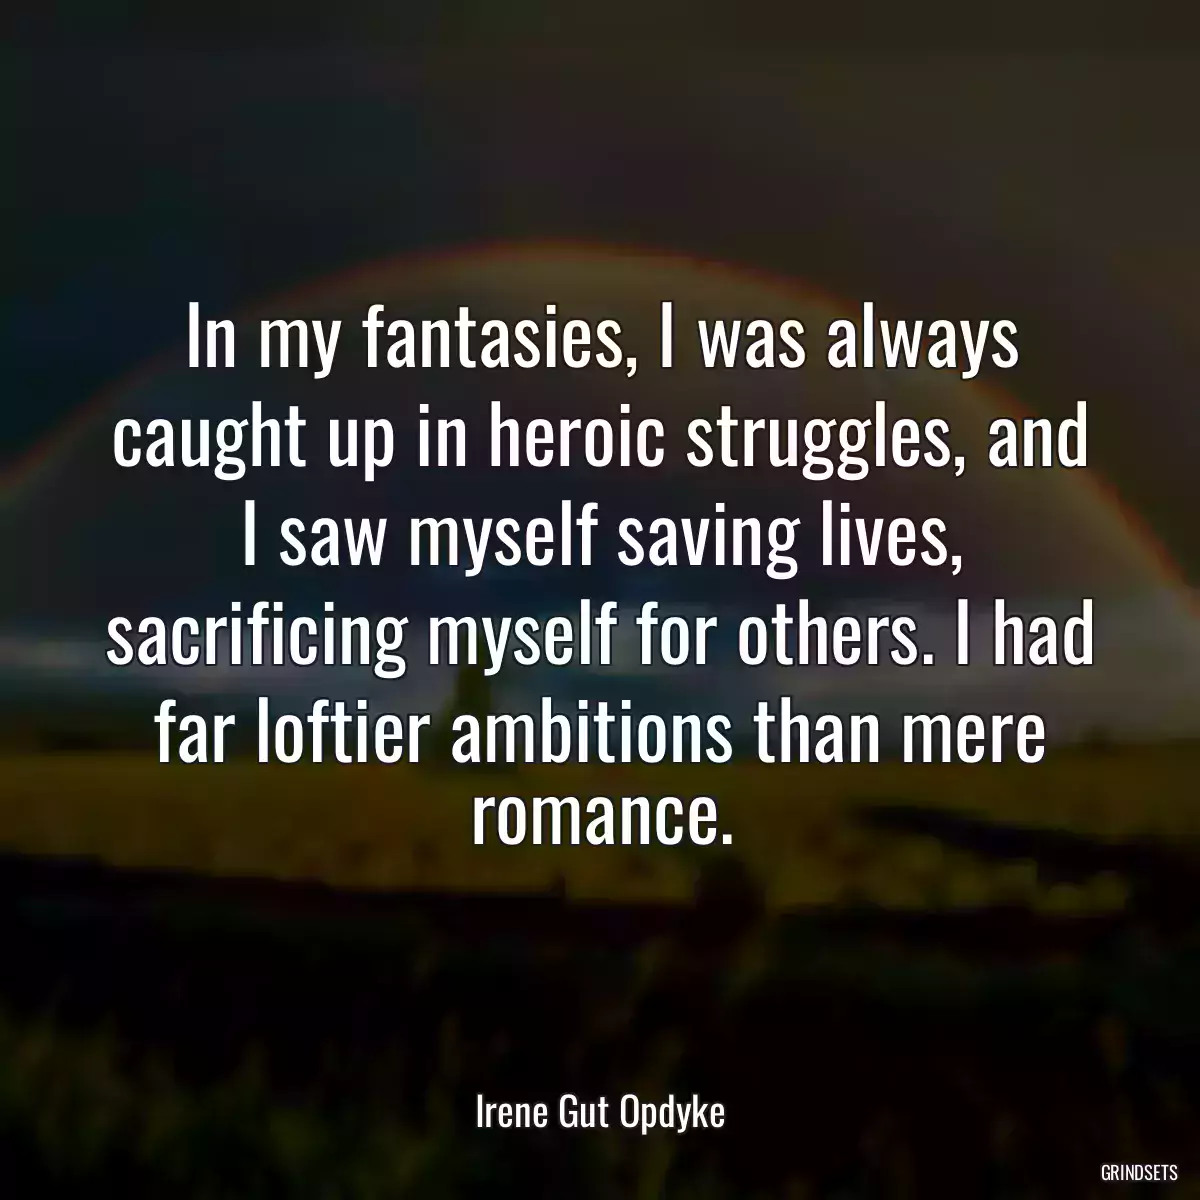 In my fantasies, I was always caught up in heroic struggles, and I saw myself saving lives, sacrificing myself for others. I had far loftier ambitions than mere romance.